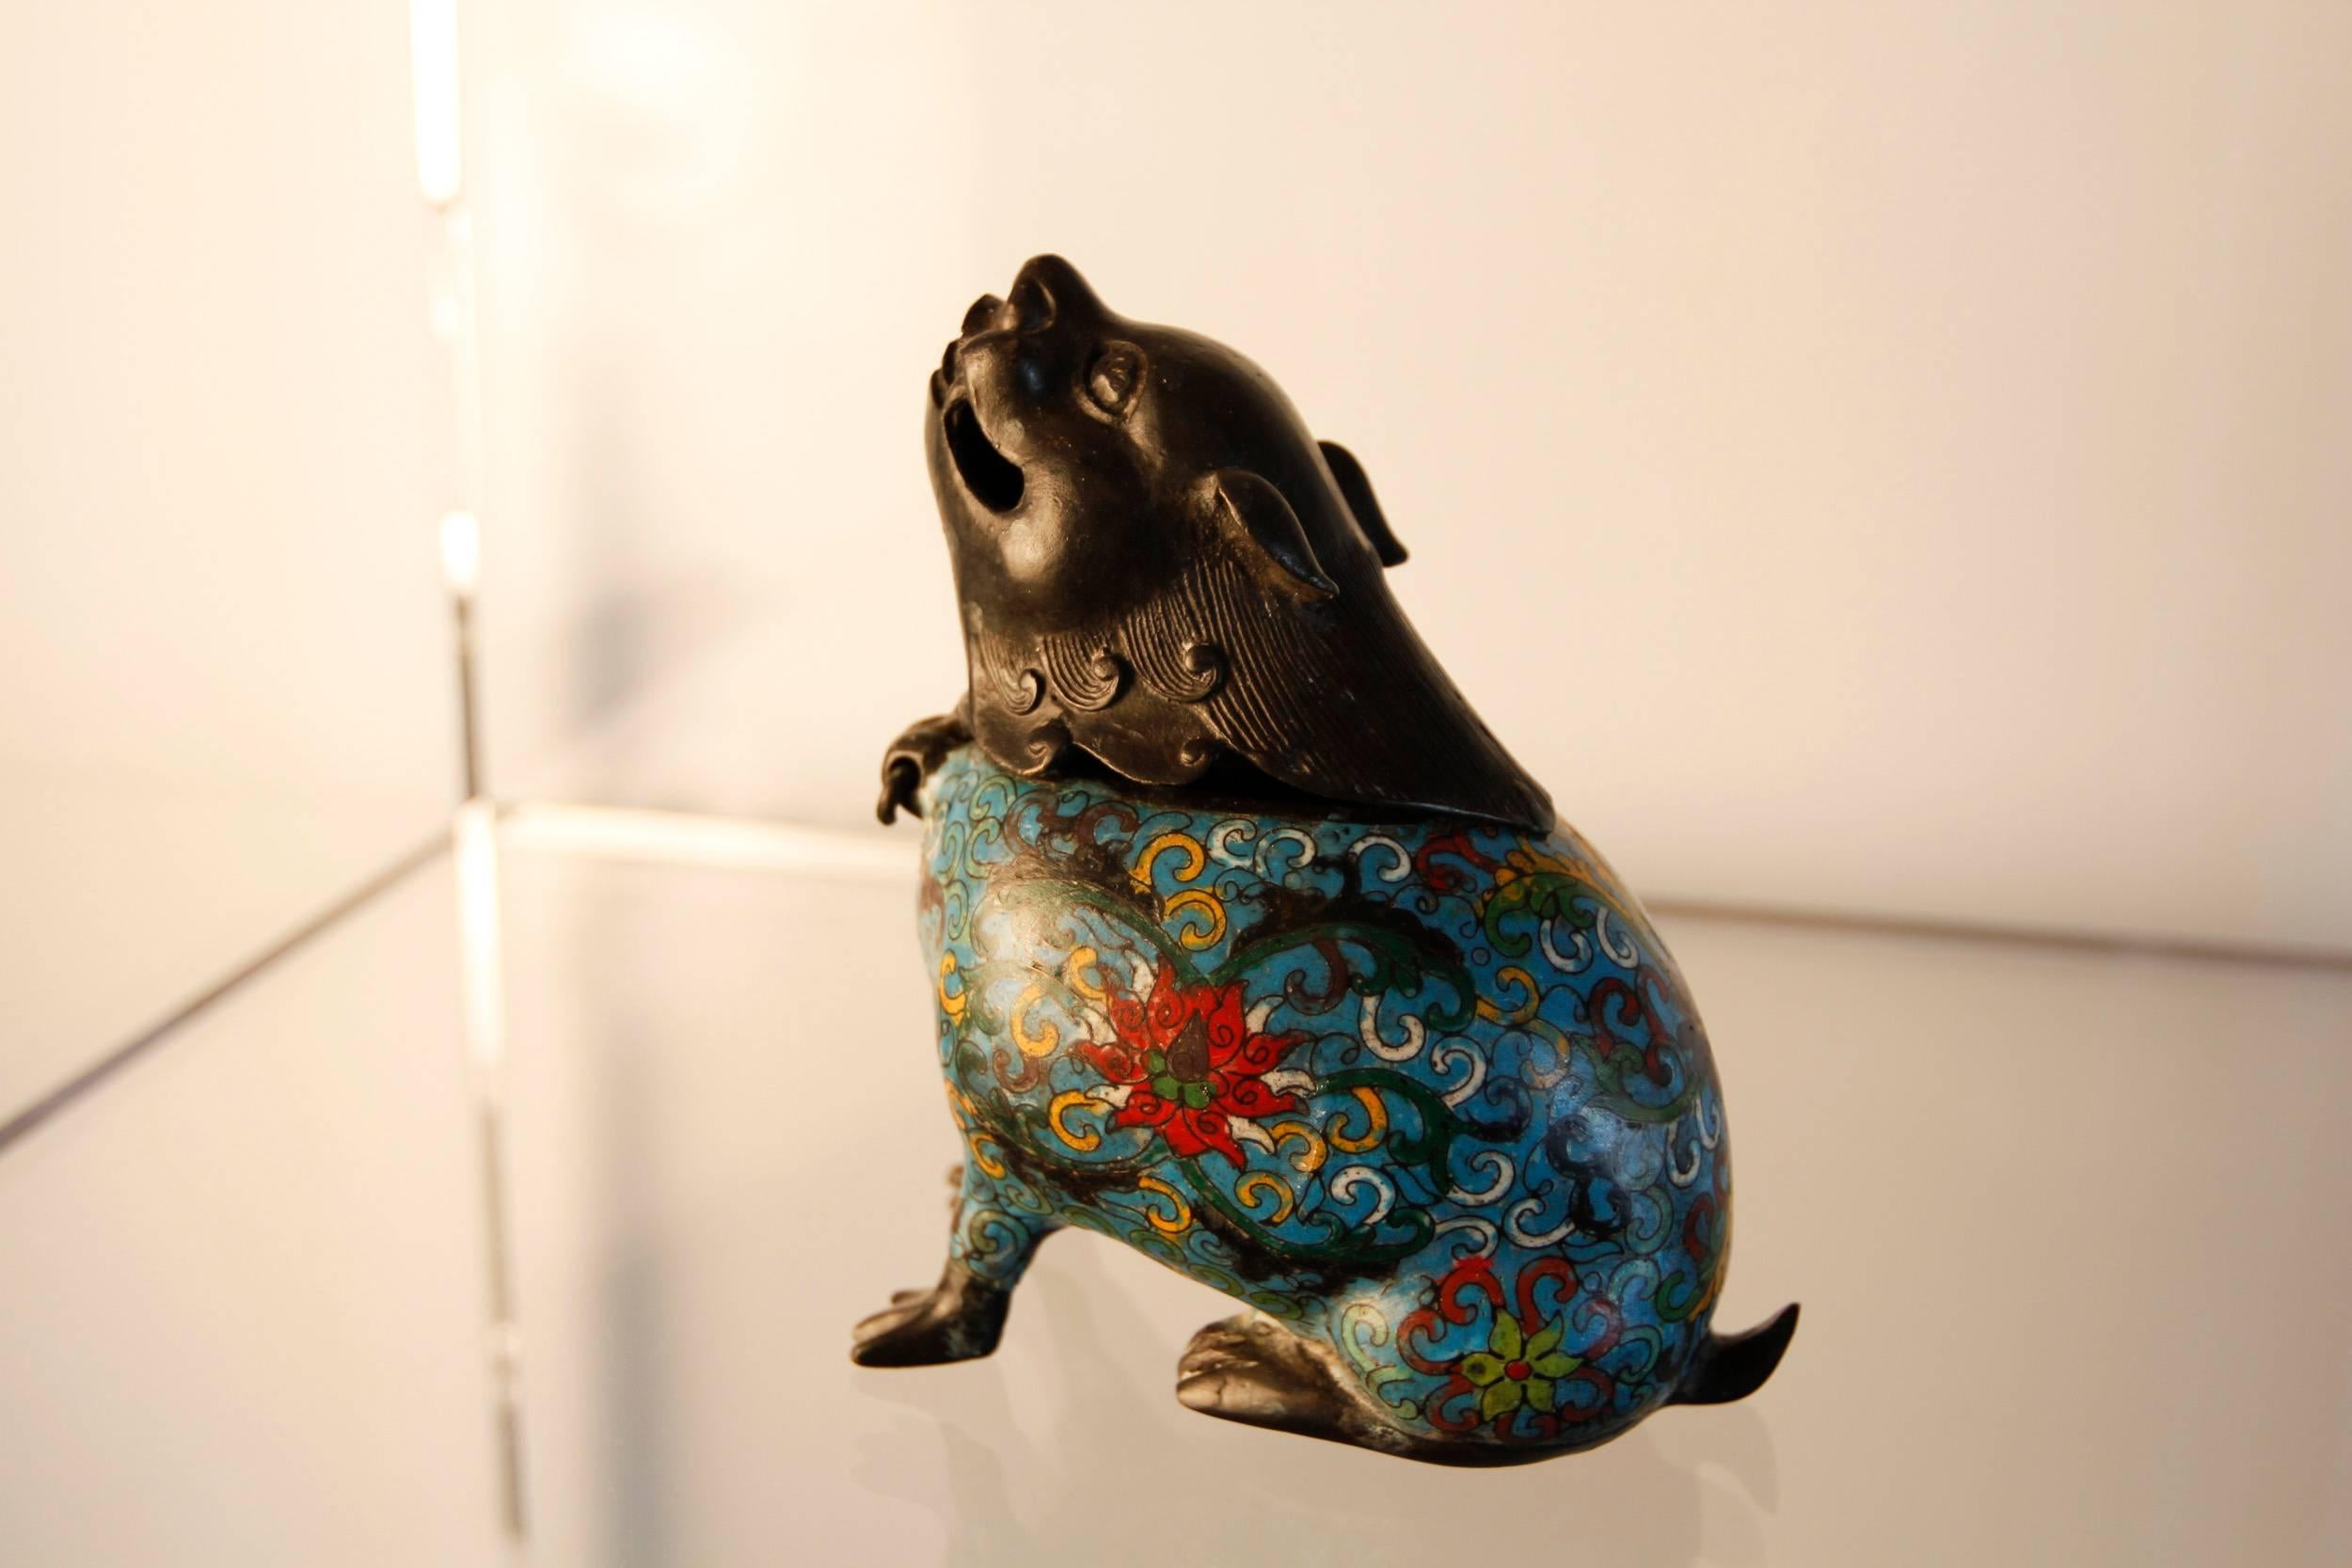 Chinese fu dog incense burner with colorful cloisonné body.